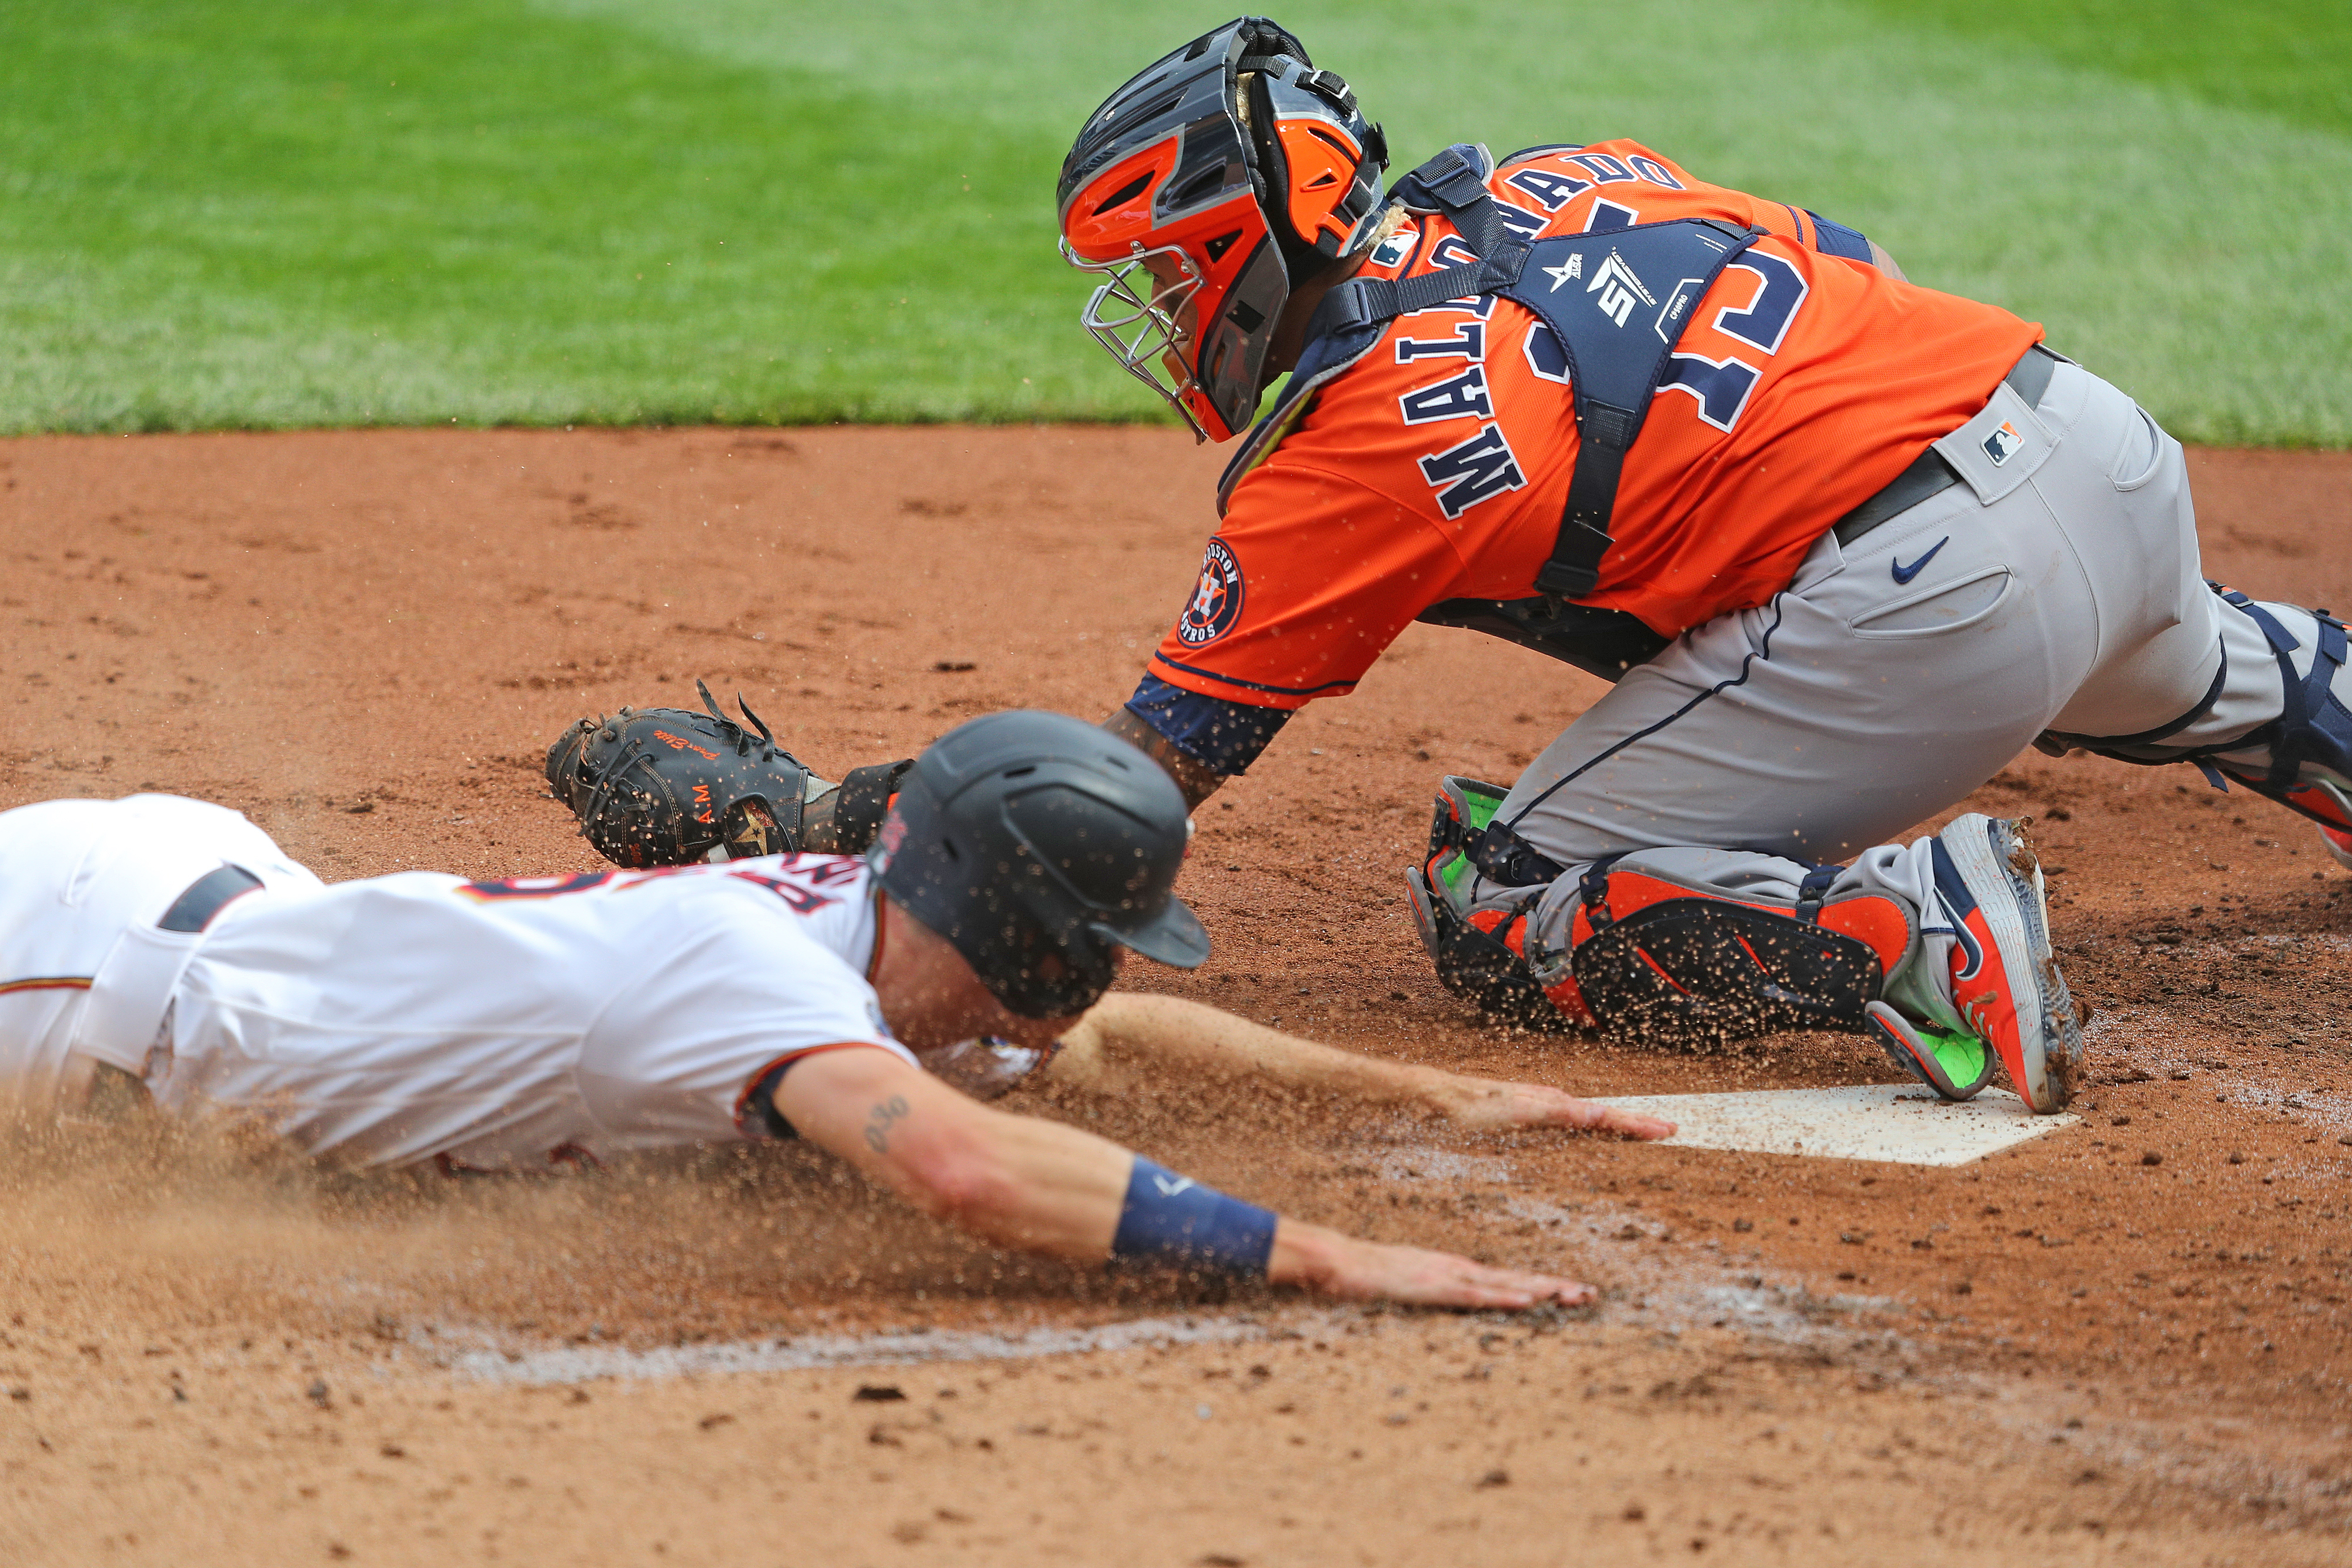 Astros win 4-1 in Game 1; Twins' record losing streak at 17